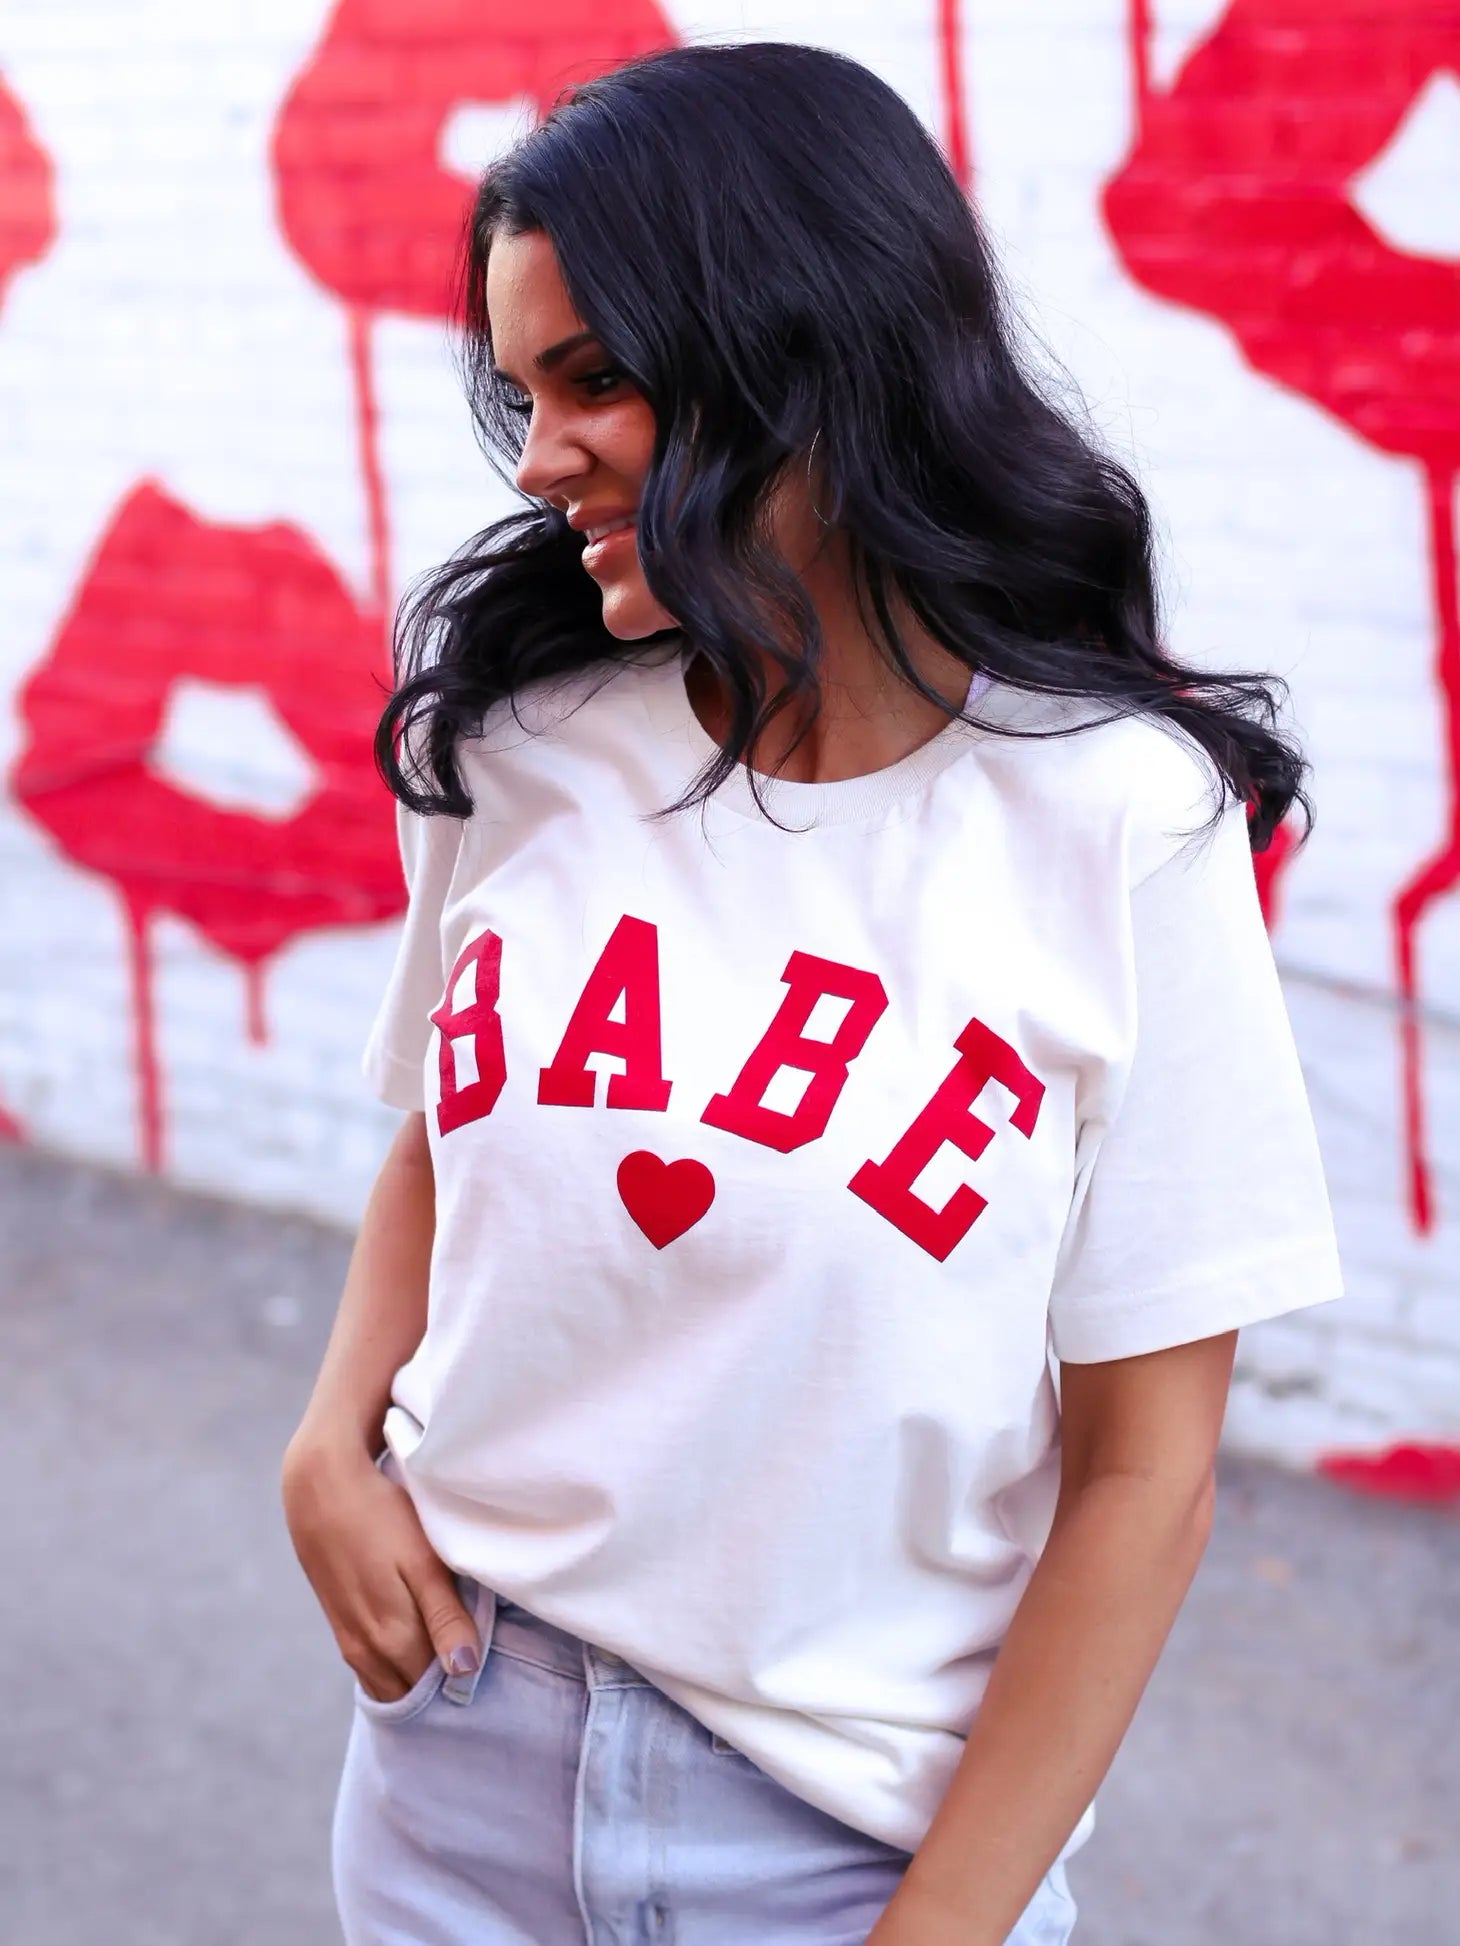 Babe Graphic Tee